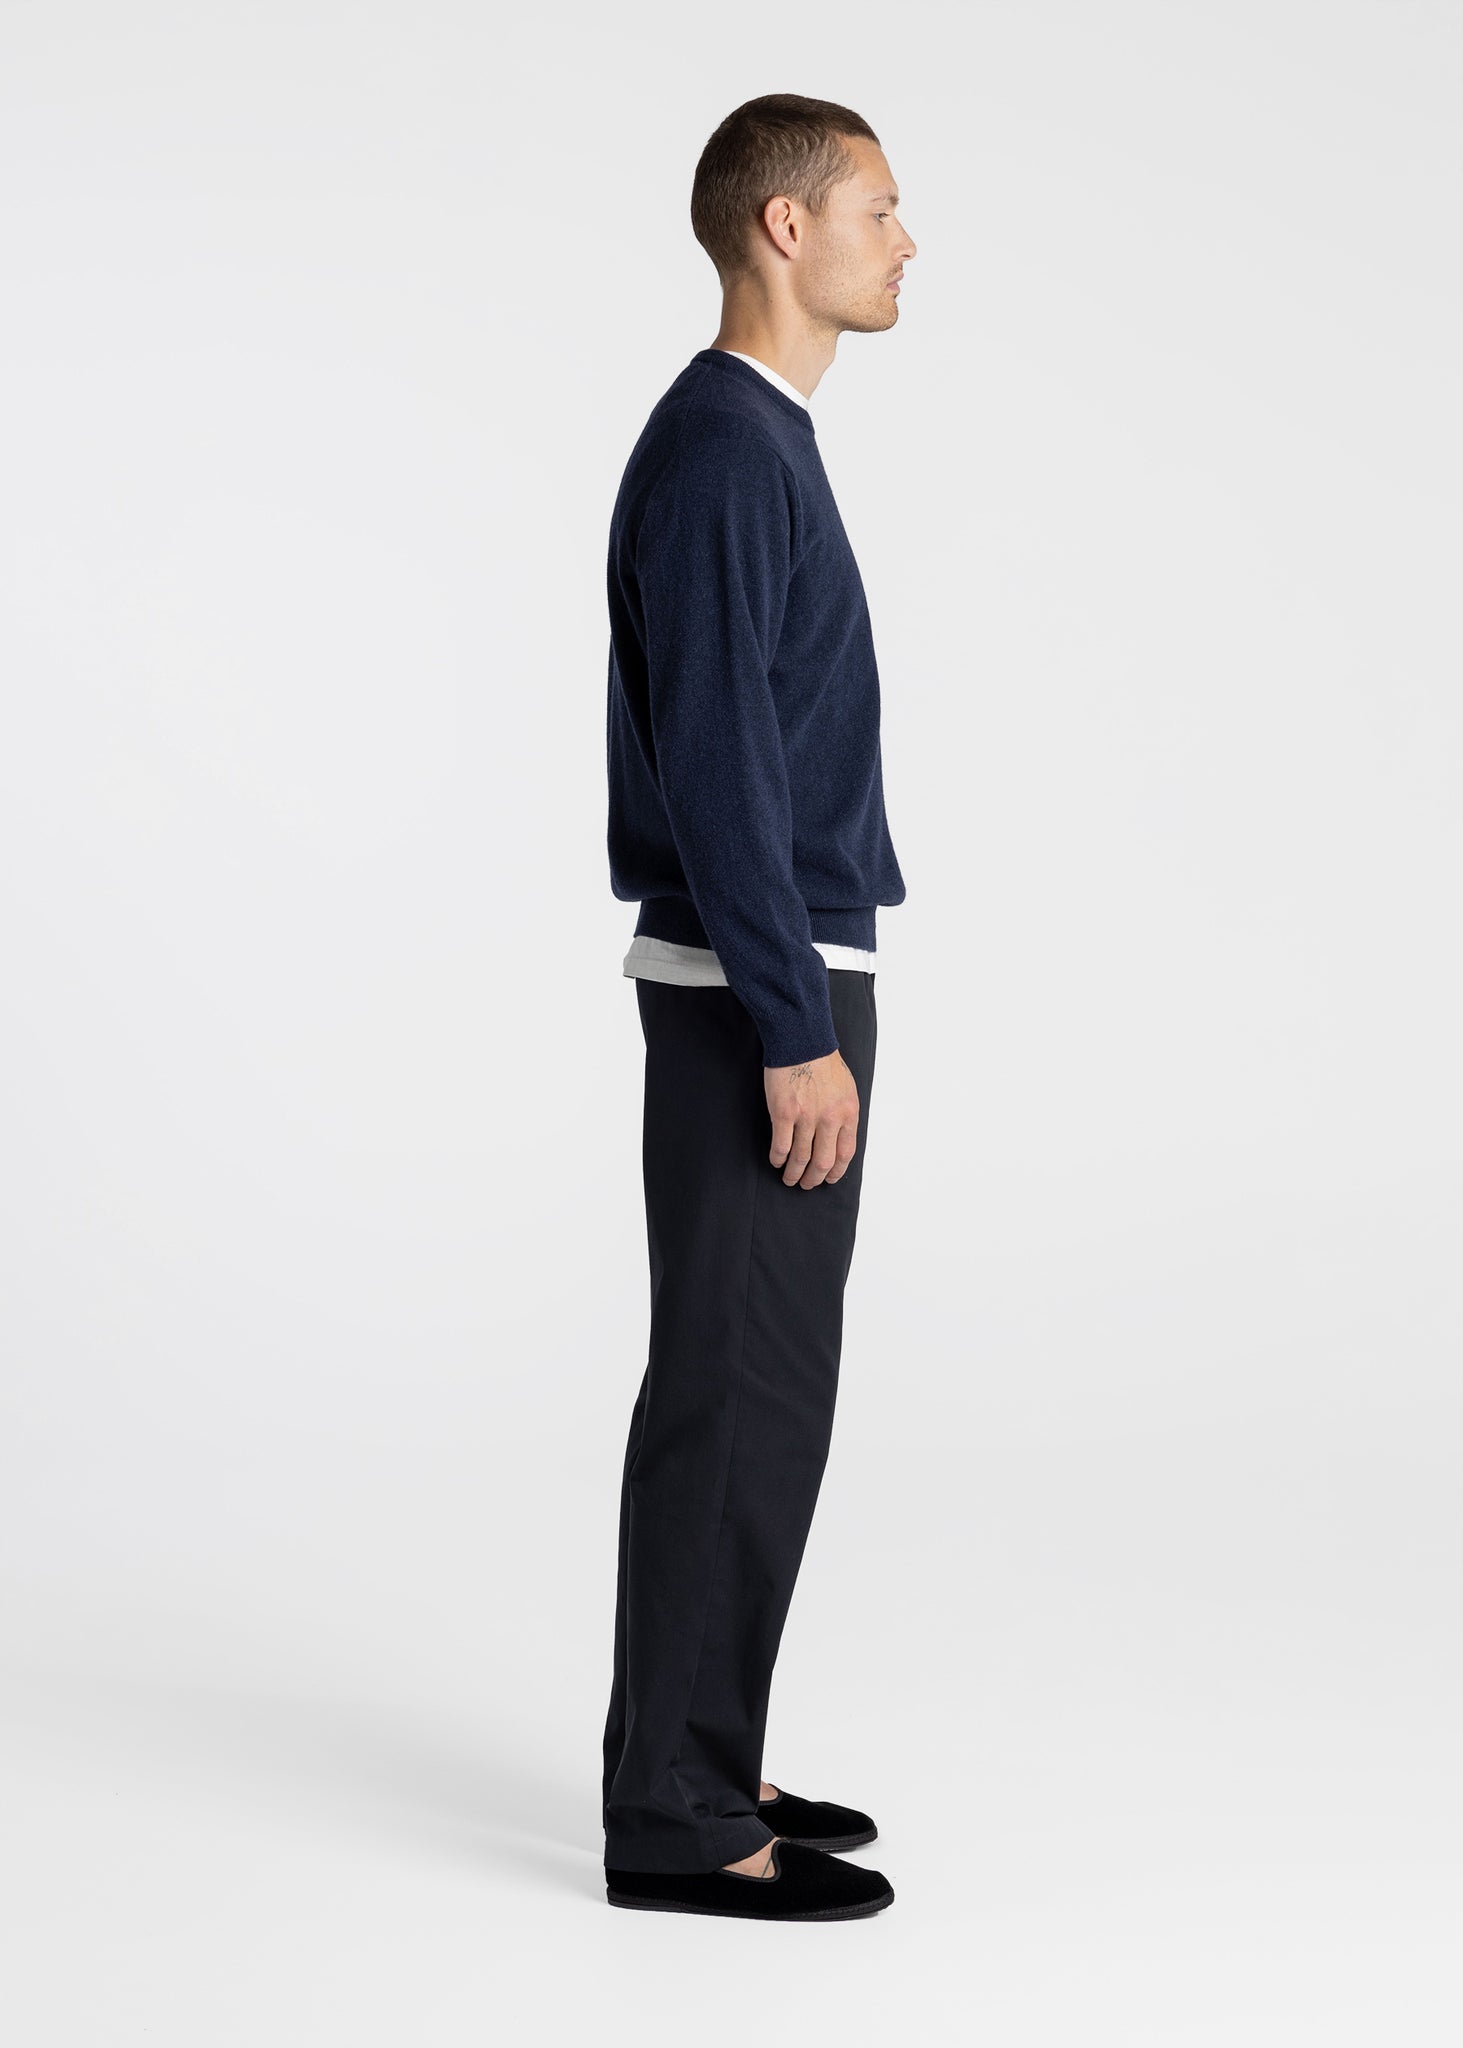 Lambswool Sweater Navy – UNRECORDED